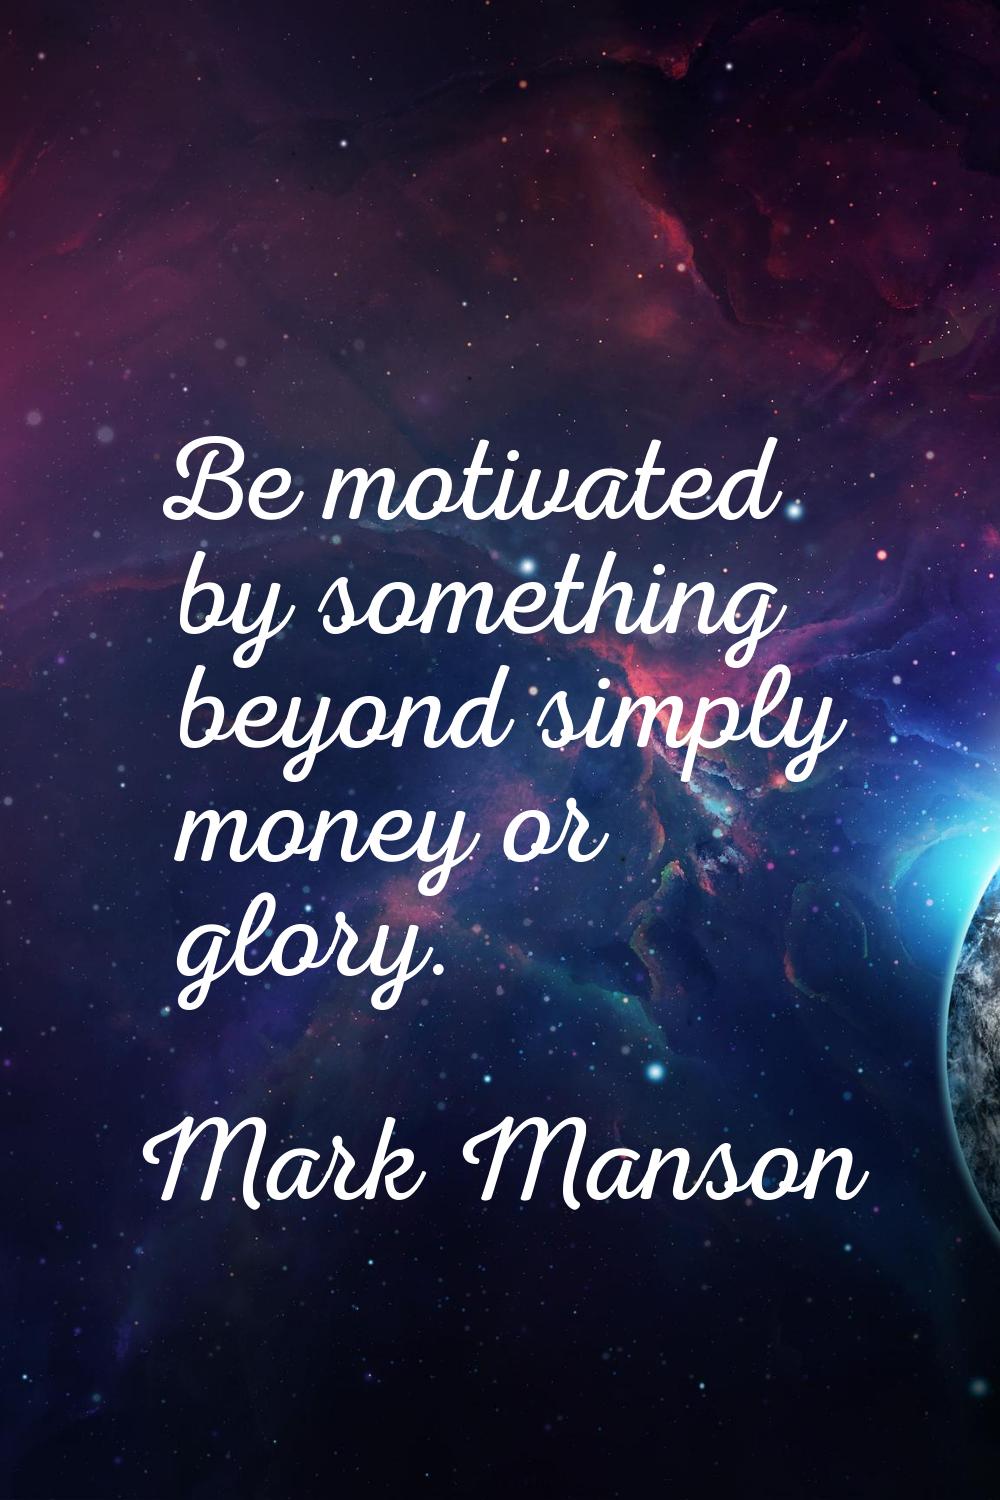 Be motivated by something beyond simply money or glory.